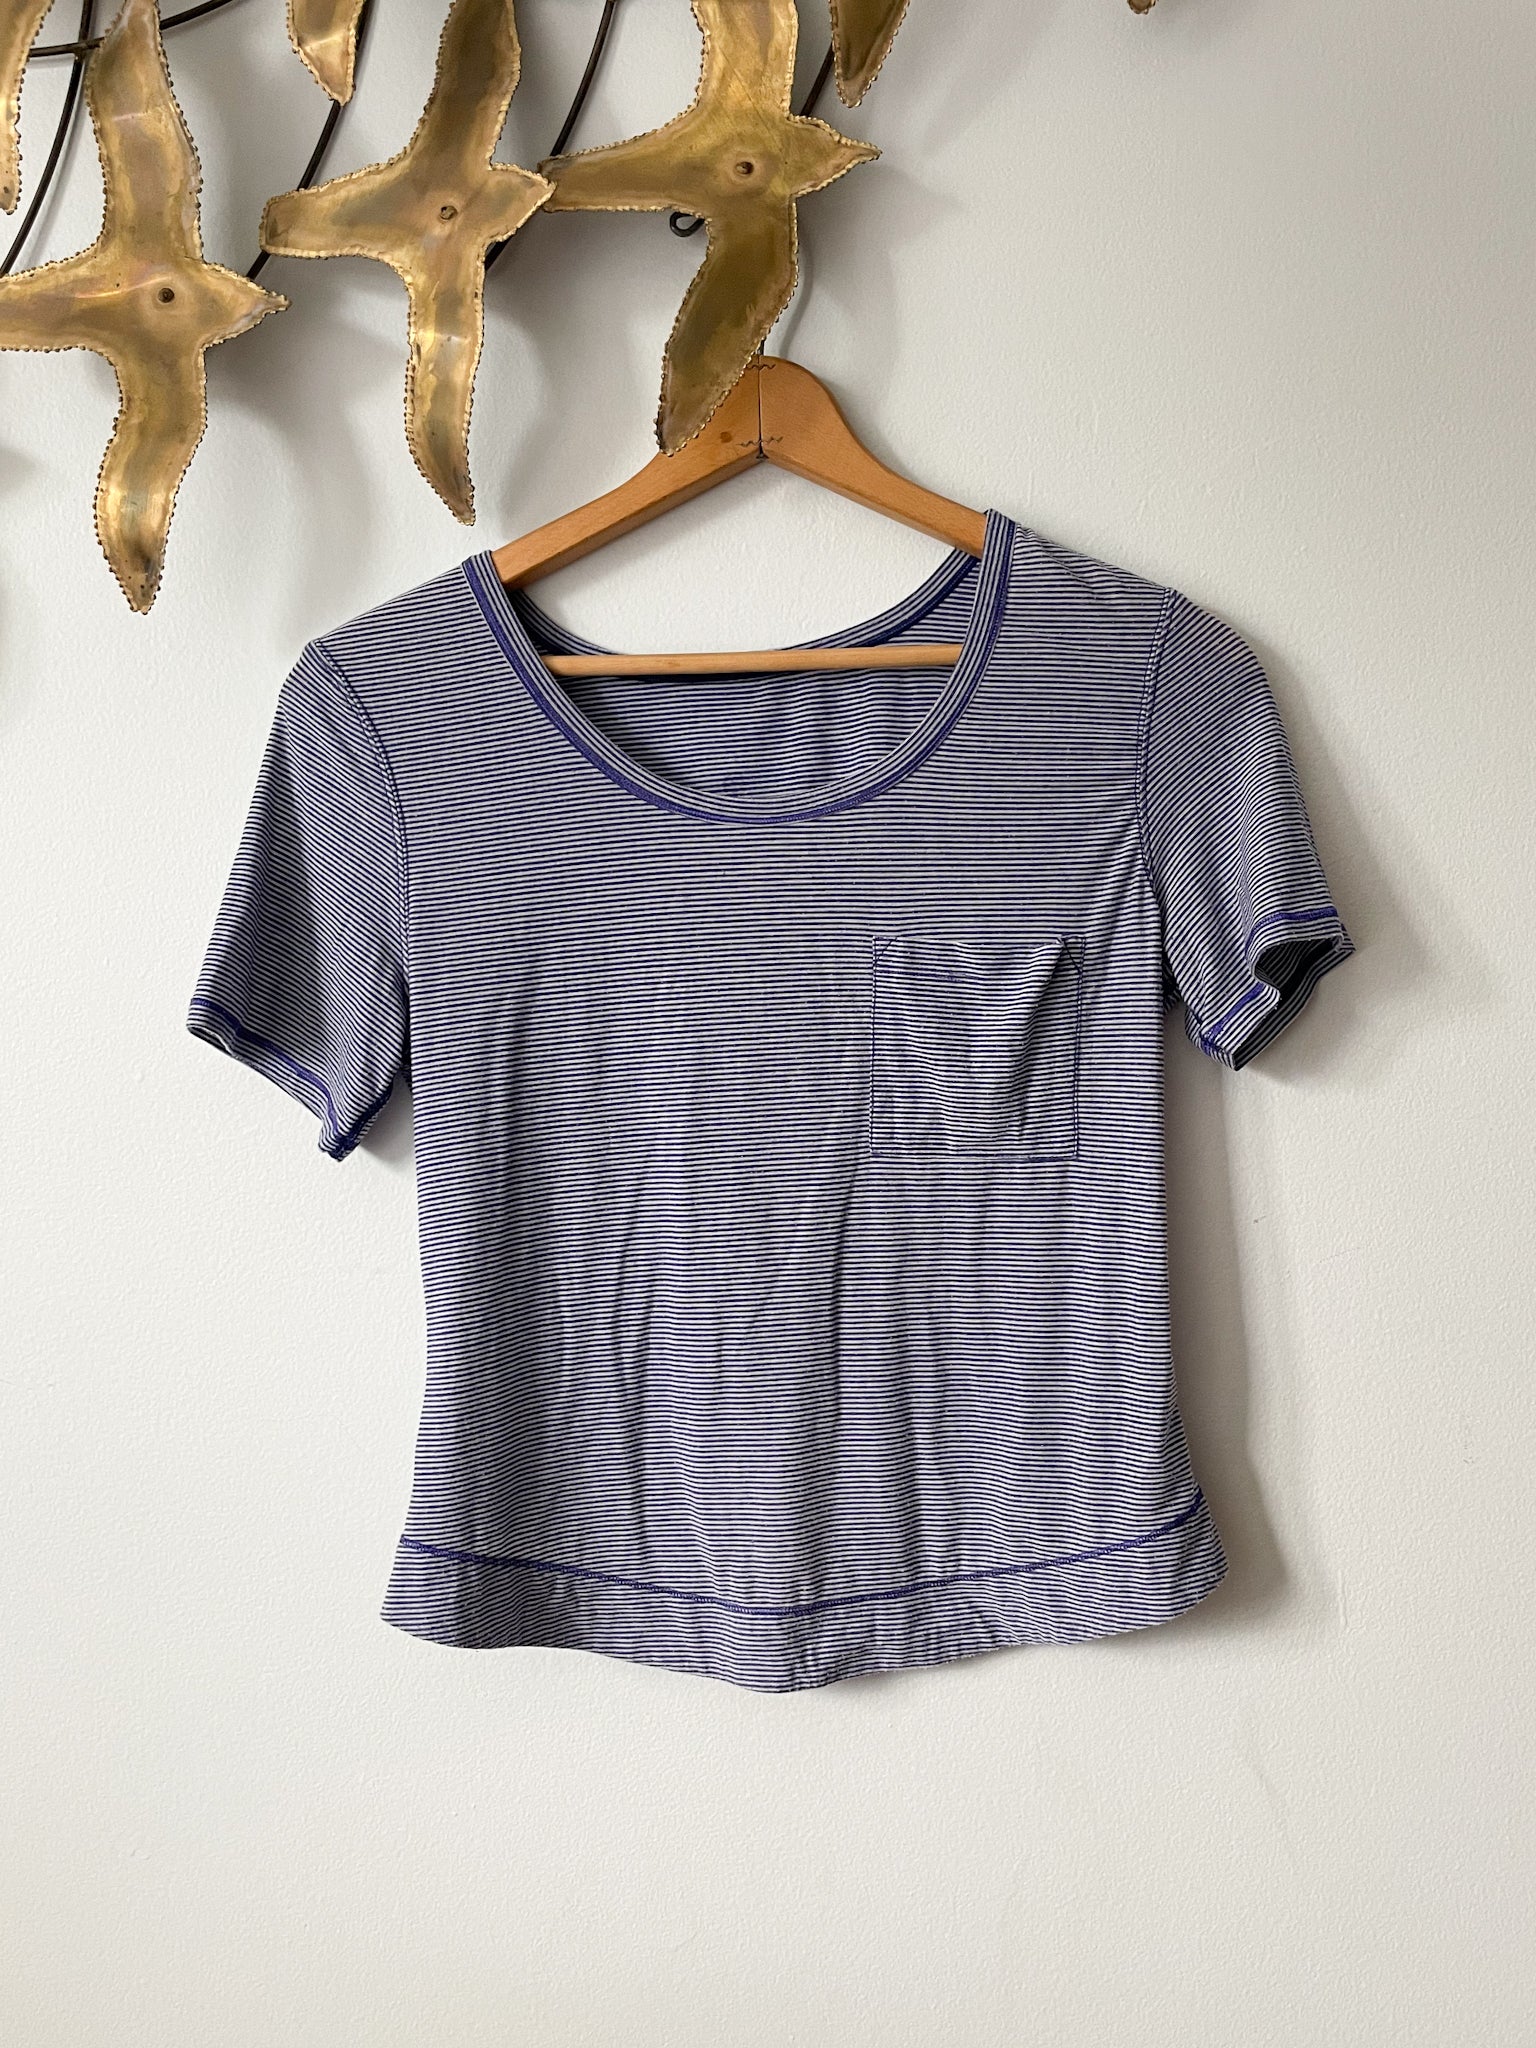 Lululemon Blue Purple Stripe Cropped Back Athletic T-Shirt Top - Small – Le  Prix Fashion & Consulting